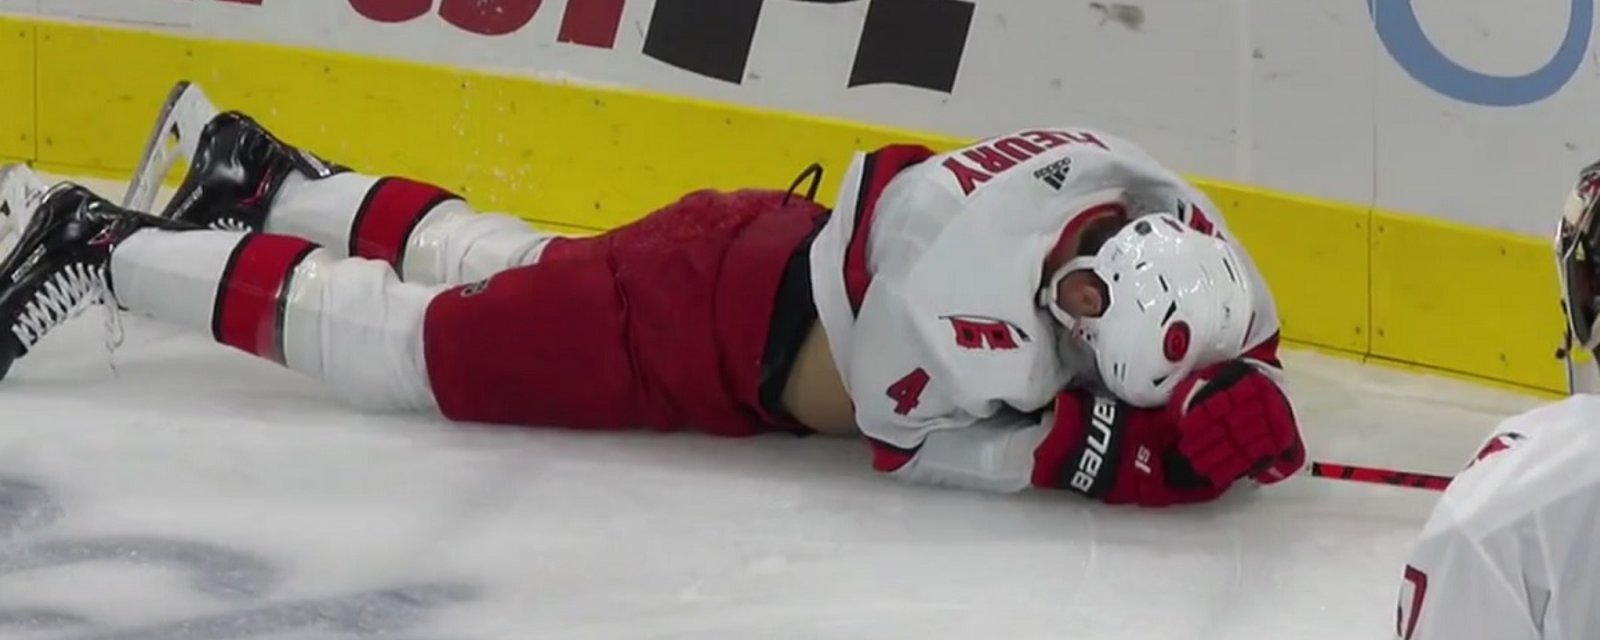 Haydn Fleury down after horrifying crash into the boards.